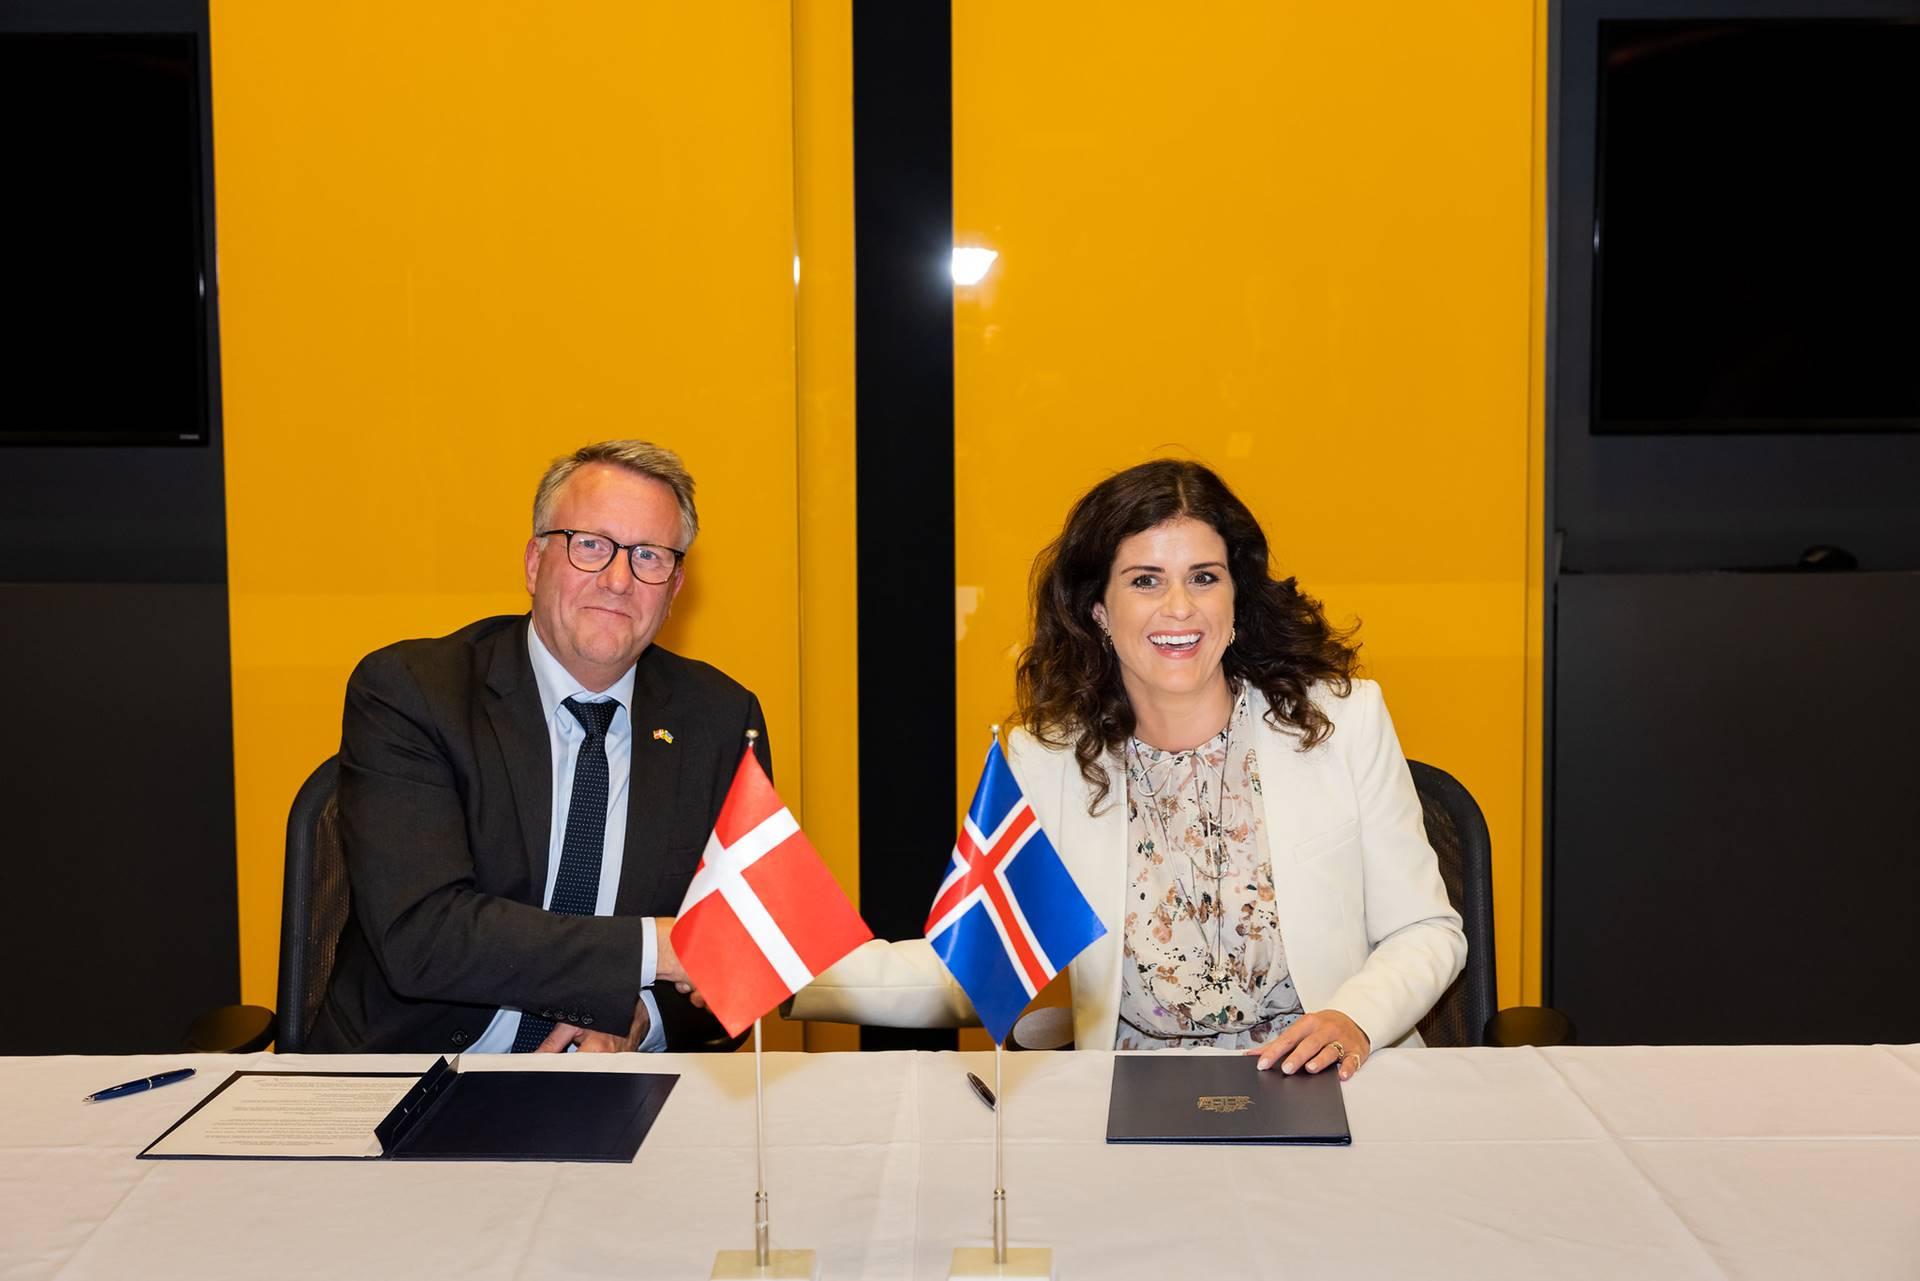 Minister Gylfadóttir and Morten Bødskov, Minister of Defence of Denmark, signed a Memorandum of Understanding on increasing security and defence cooperation between the two countries.